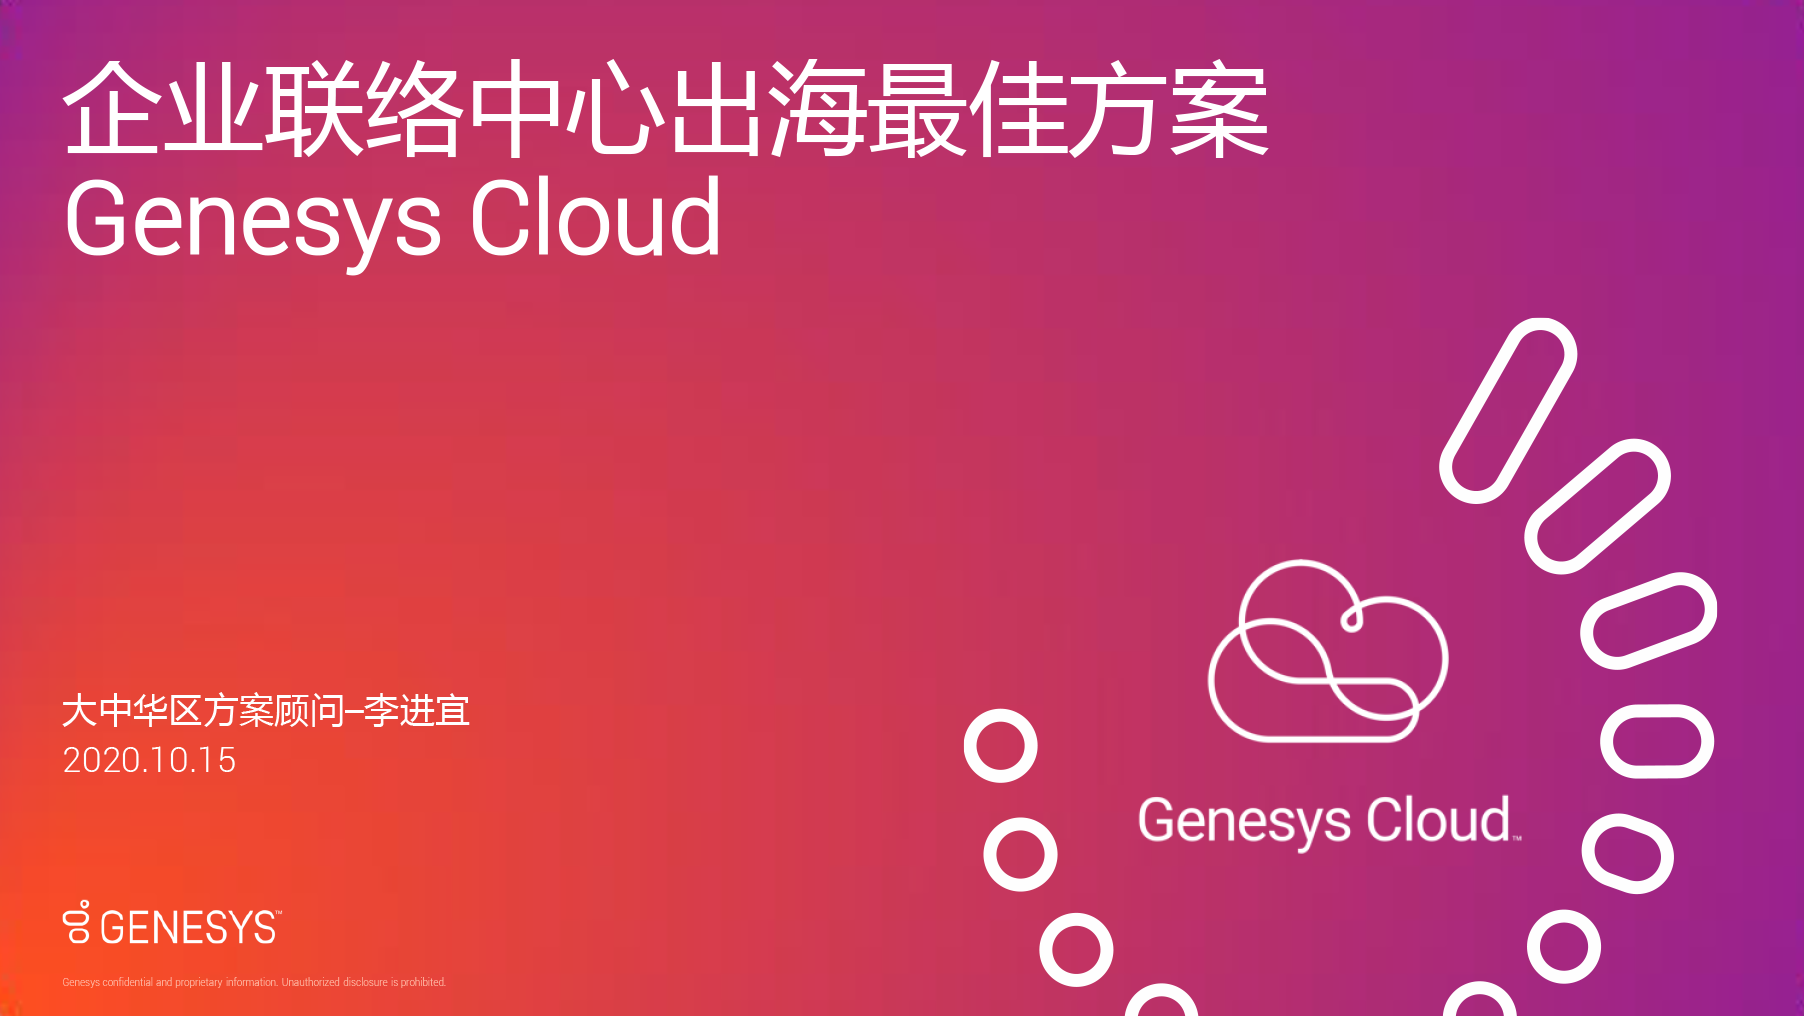 Best solution oversea genesys cloud thumbnail